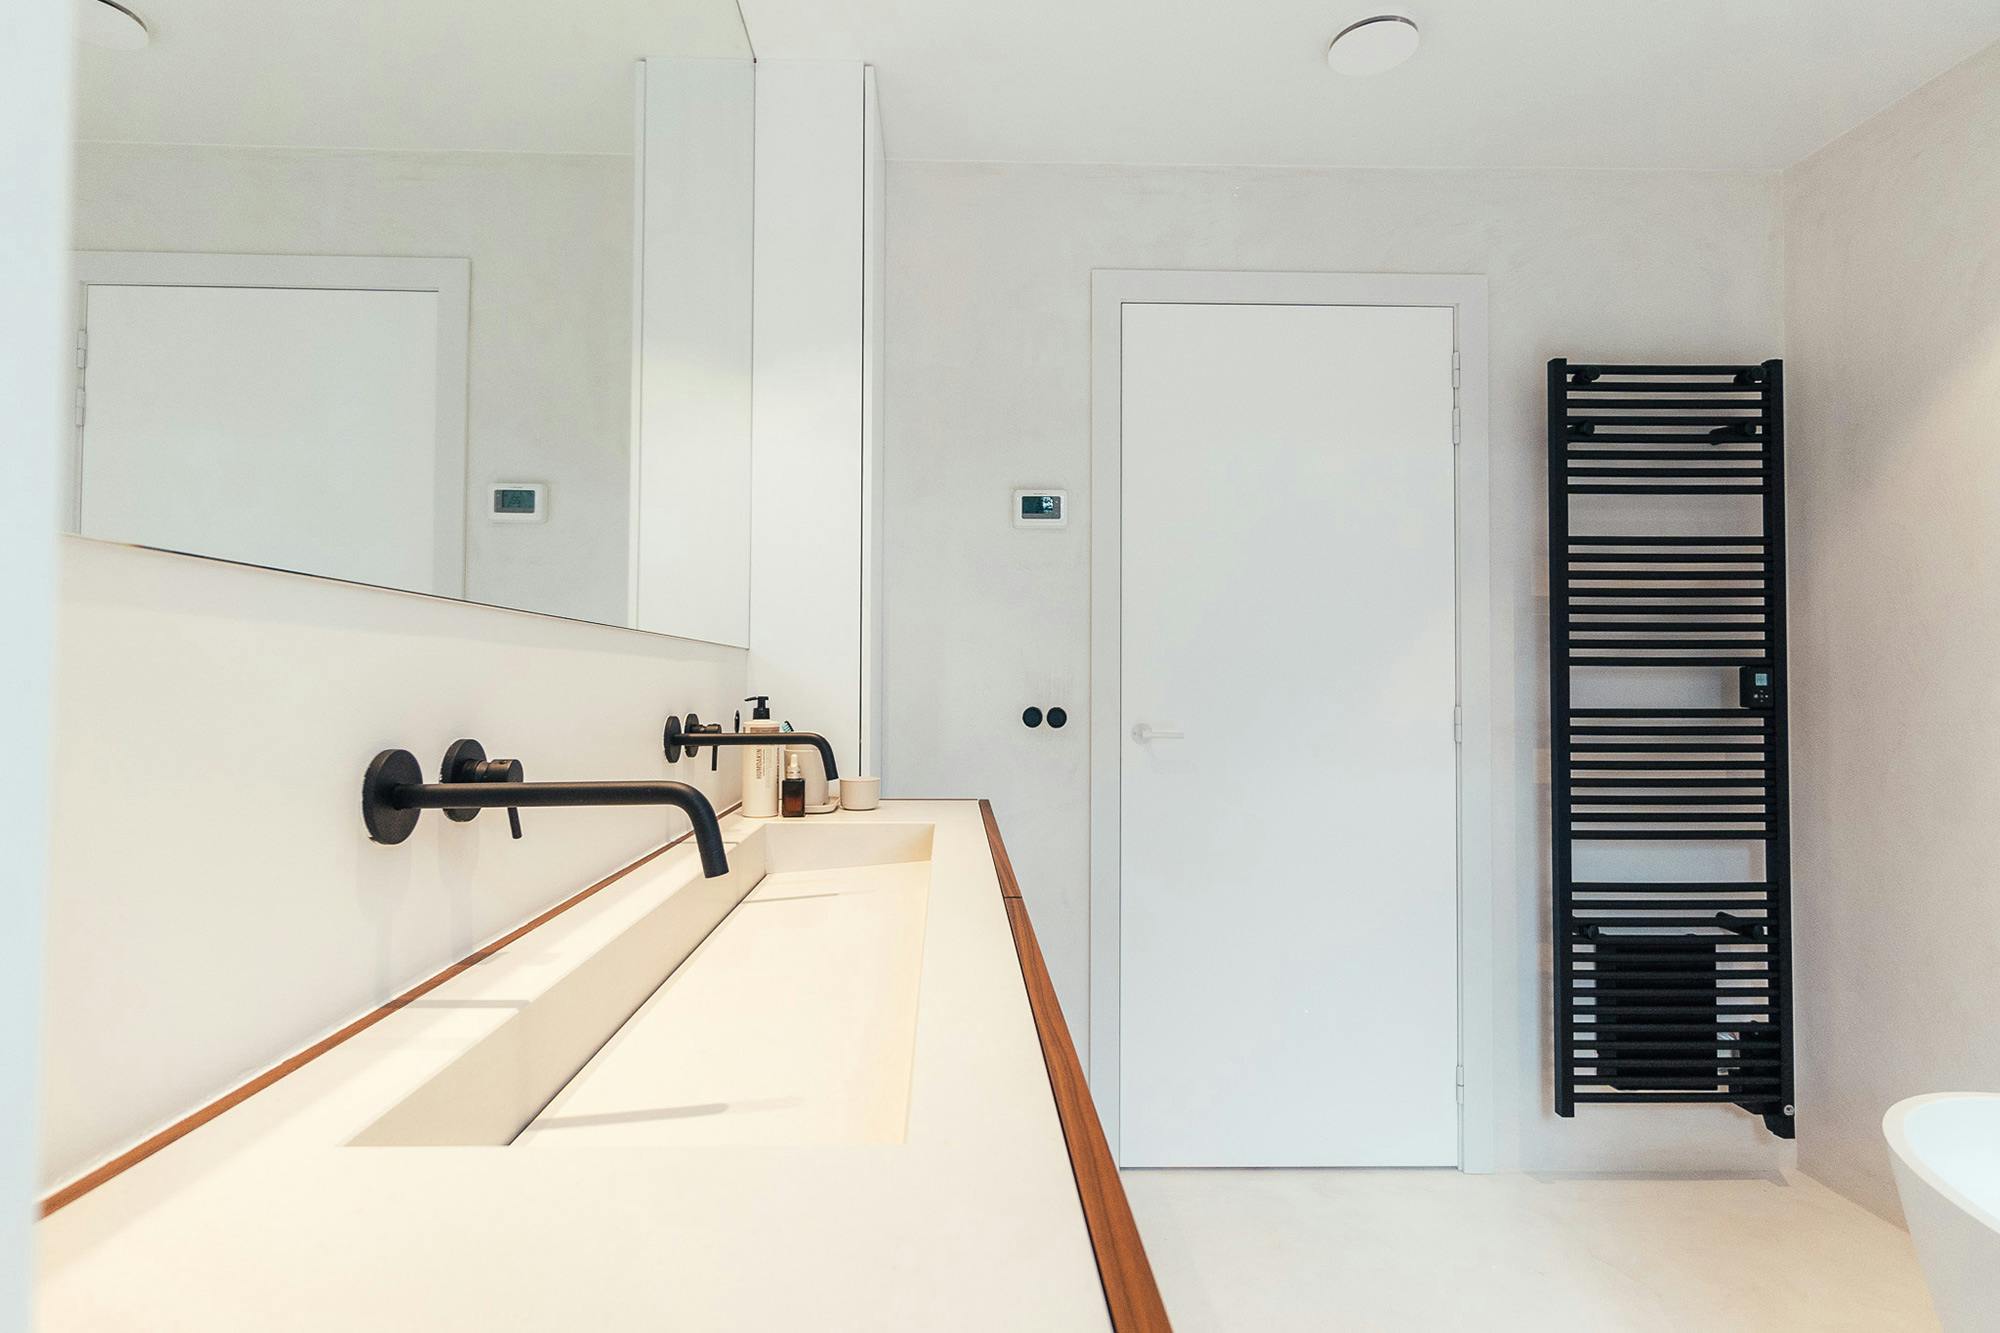 Numéro d'image 37 de la section actuelle de Cosentino was the perfect solution for the beautiful and functional kitchen and bathrooms in this lovely Sydney home de Cosentino France